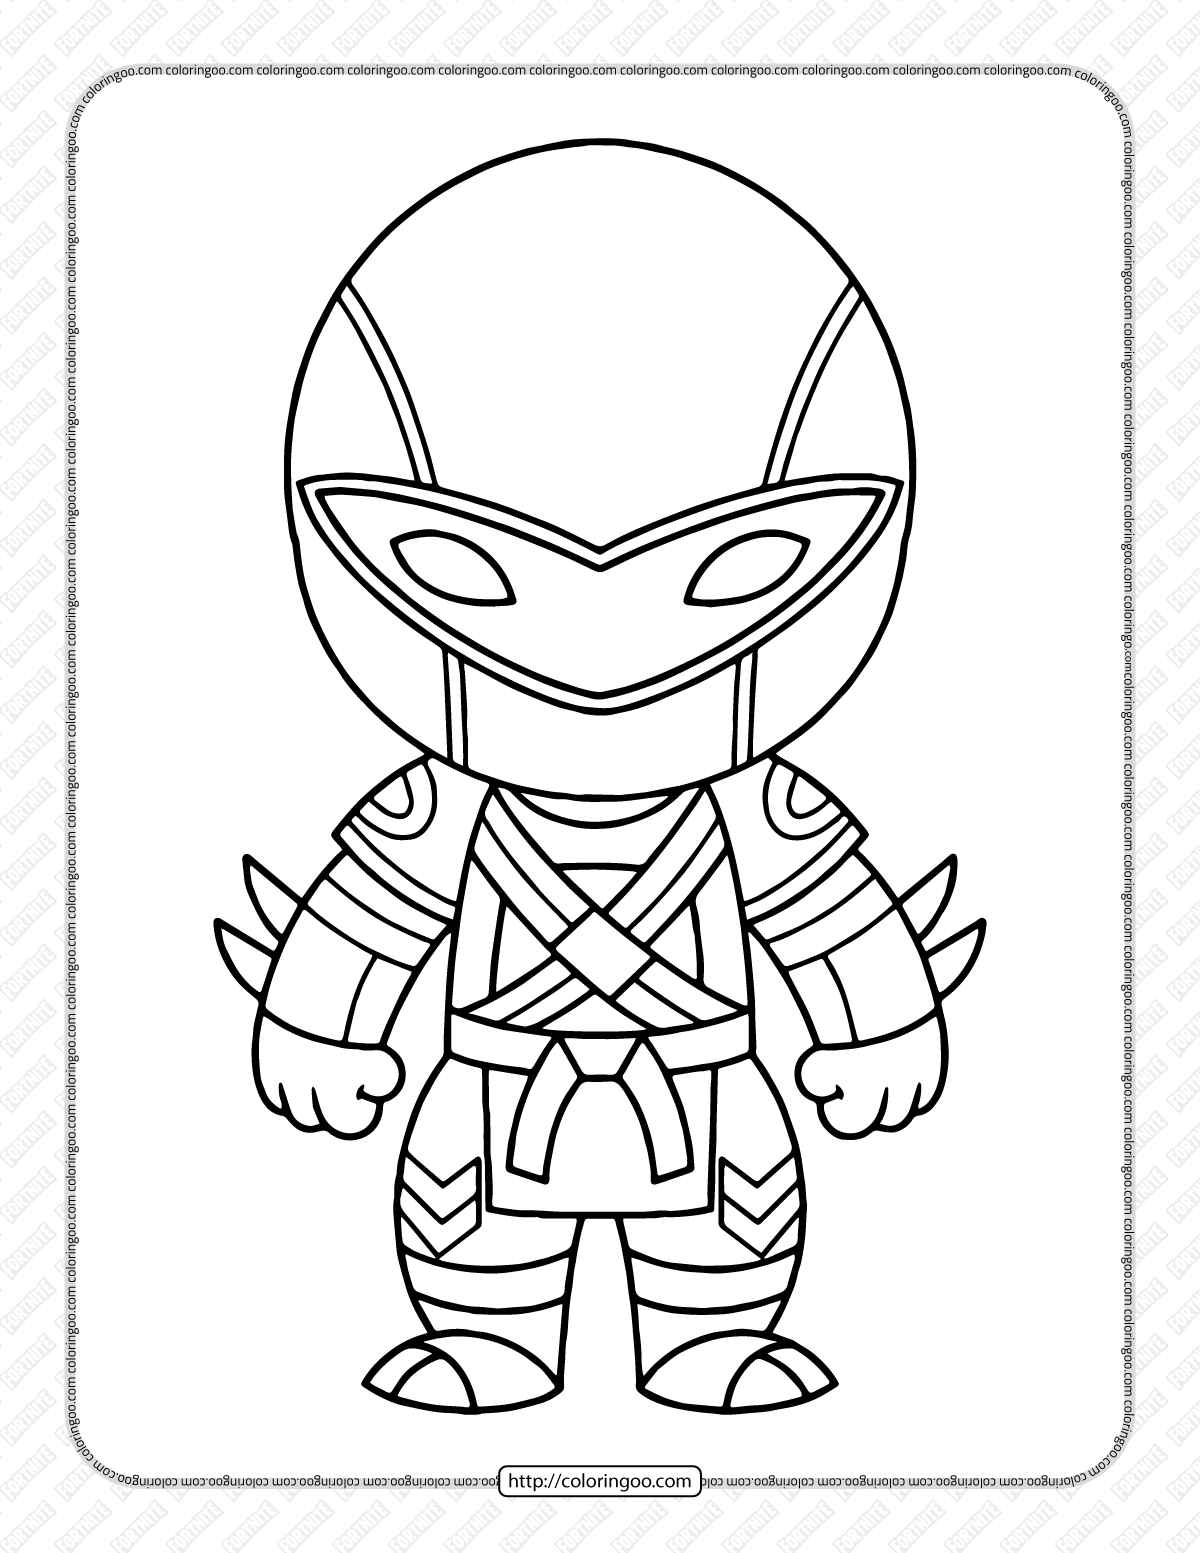 chibi fortnite coloring pages 18